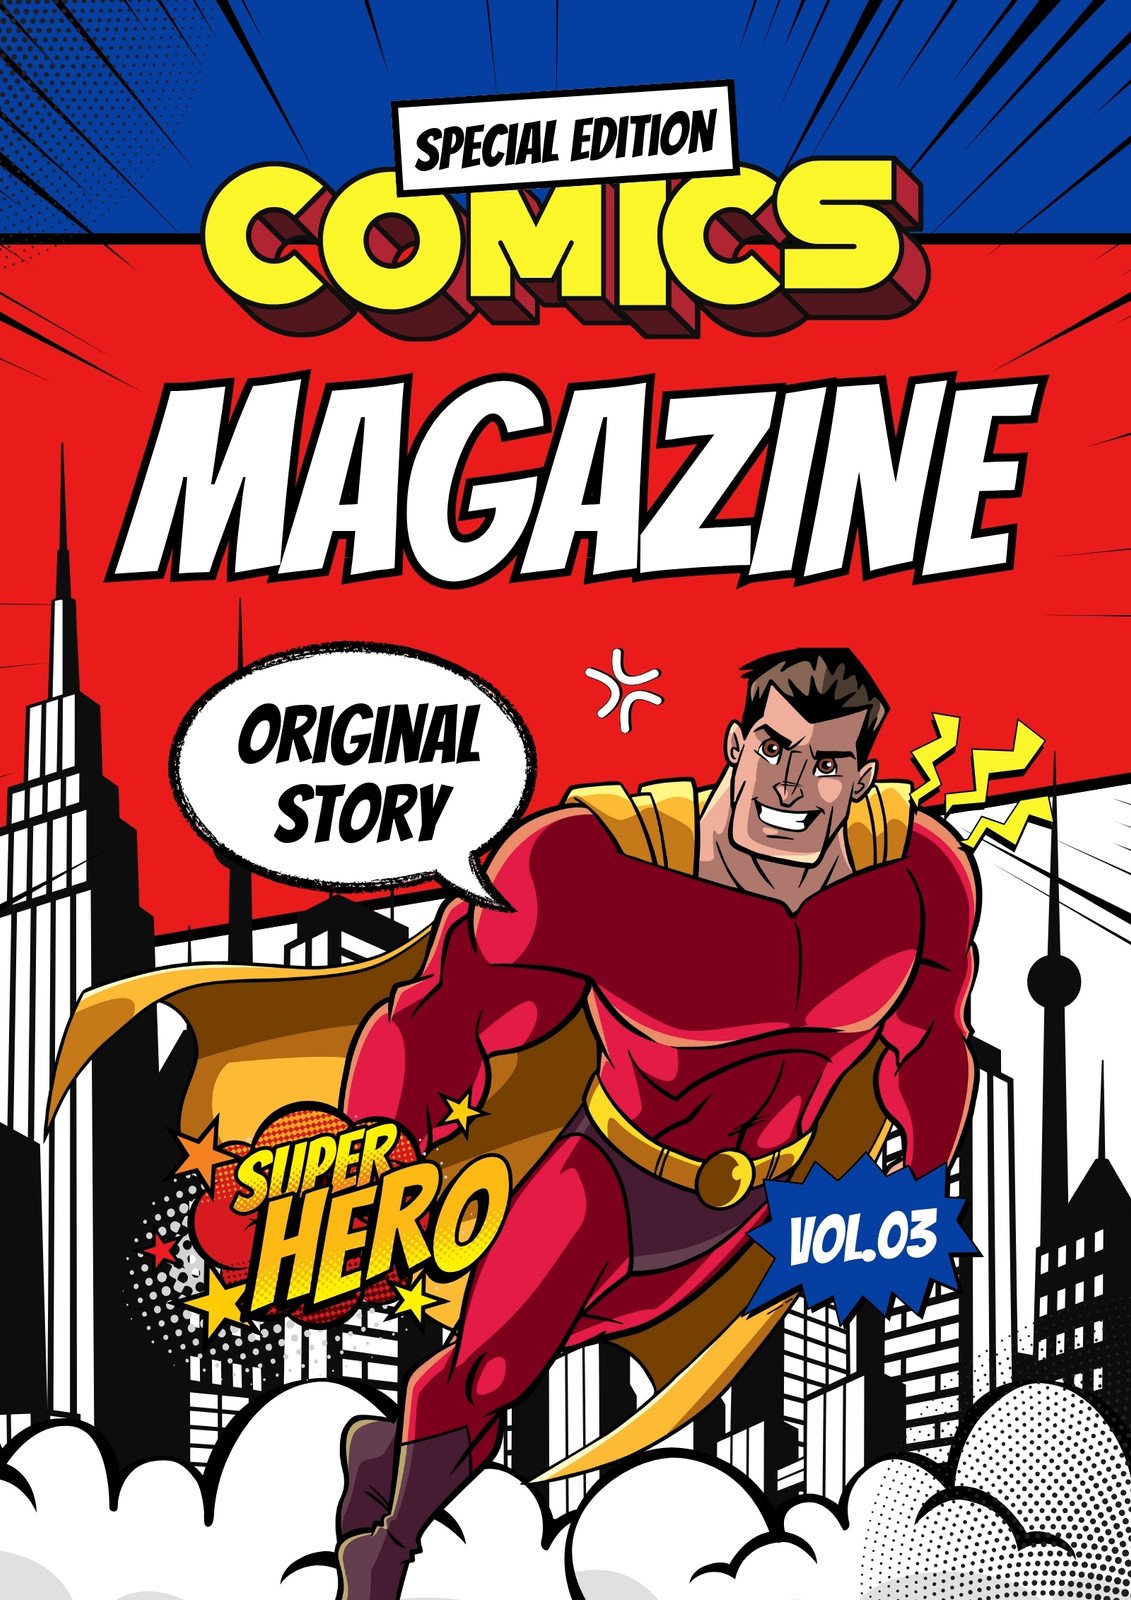 Red and Blue Comic Magazine Cover